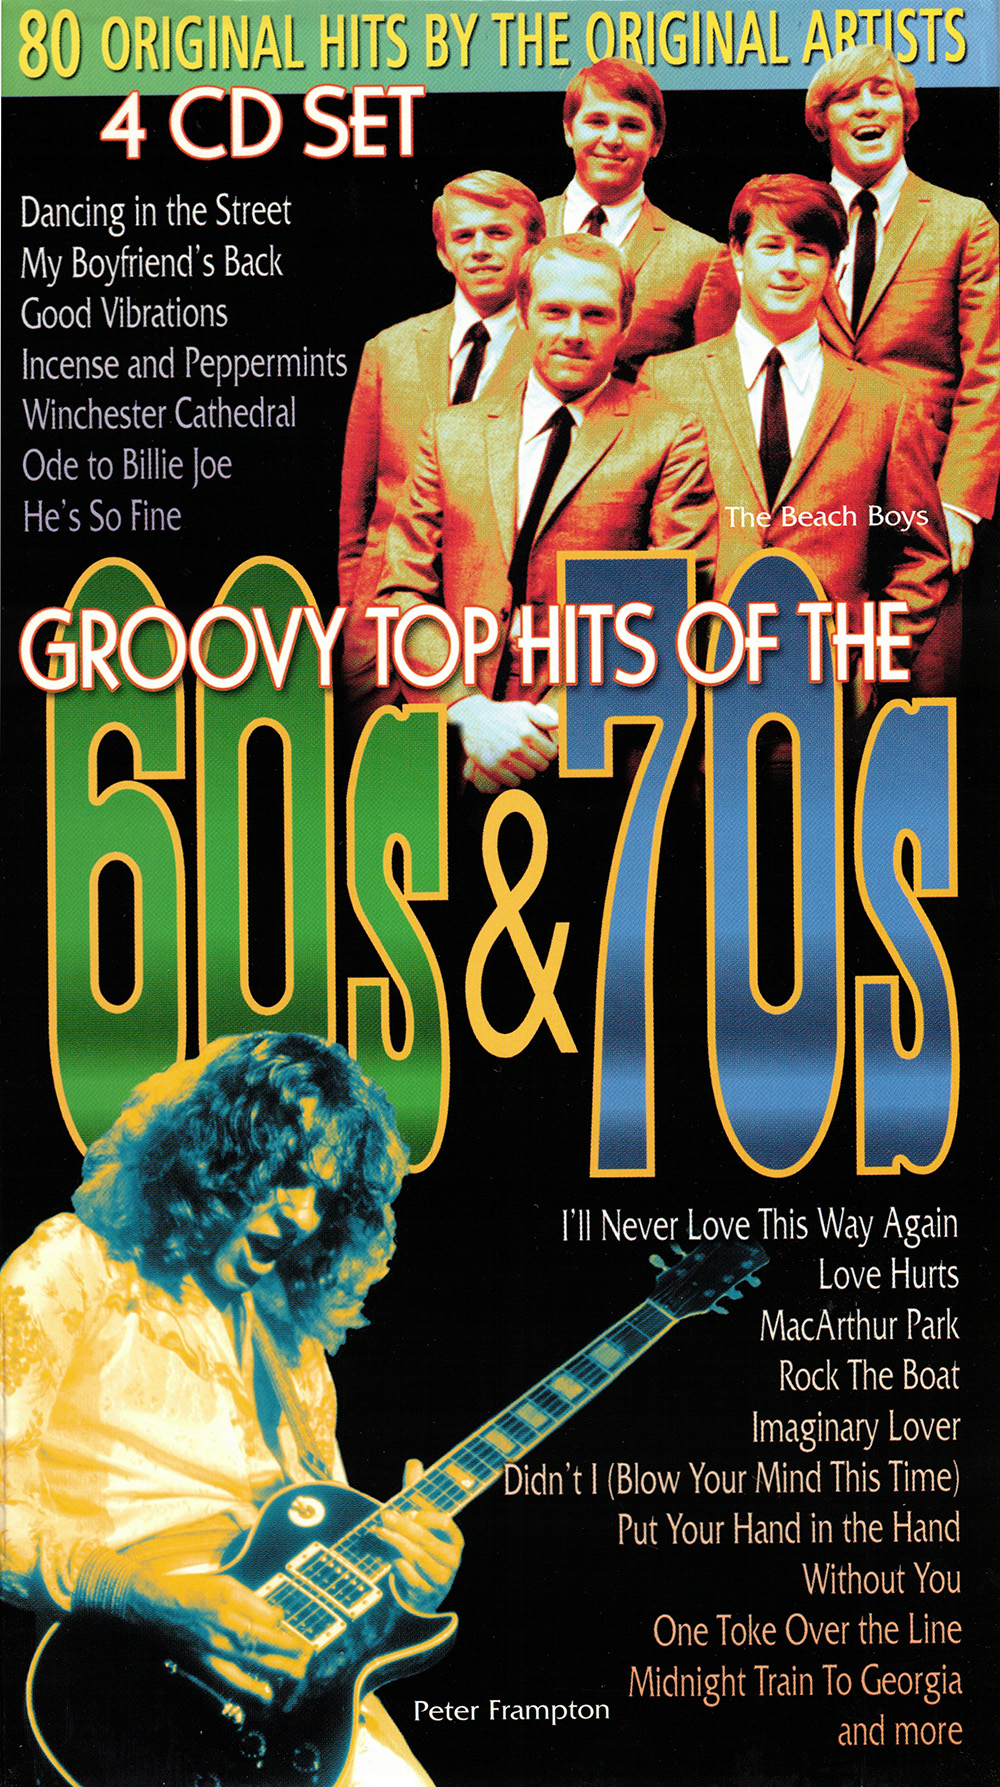 Groovy Top Hits of The 60's & 70's (4 CD)